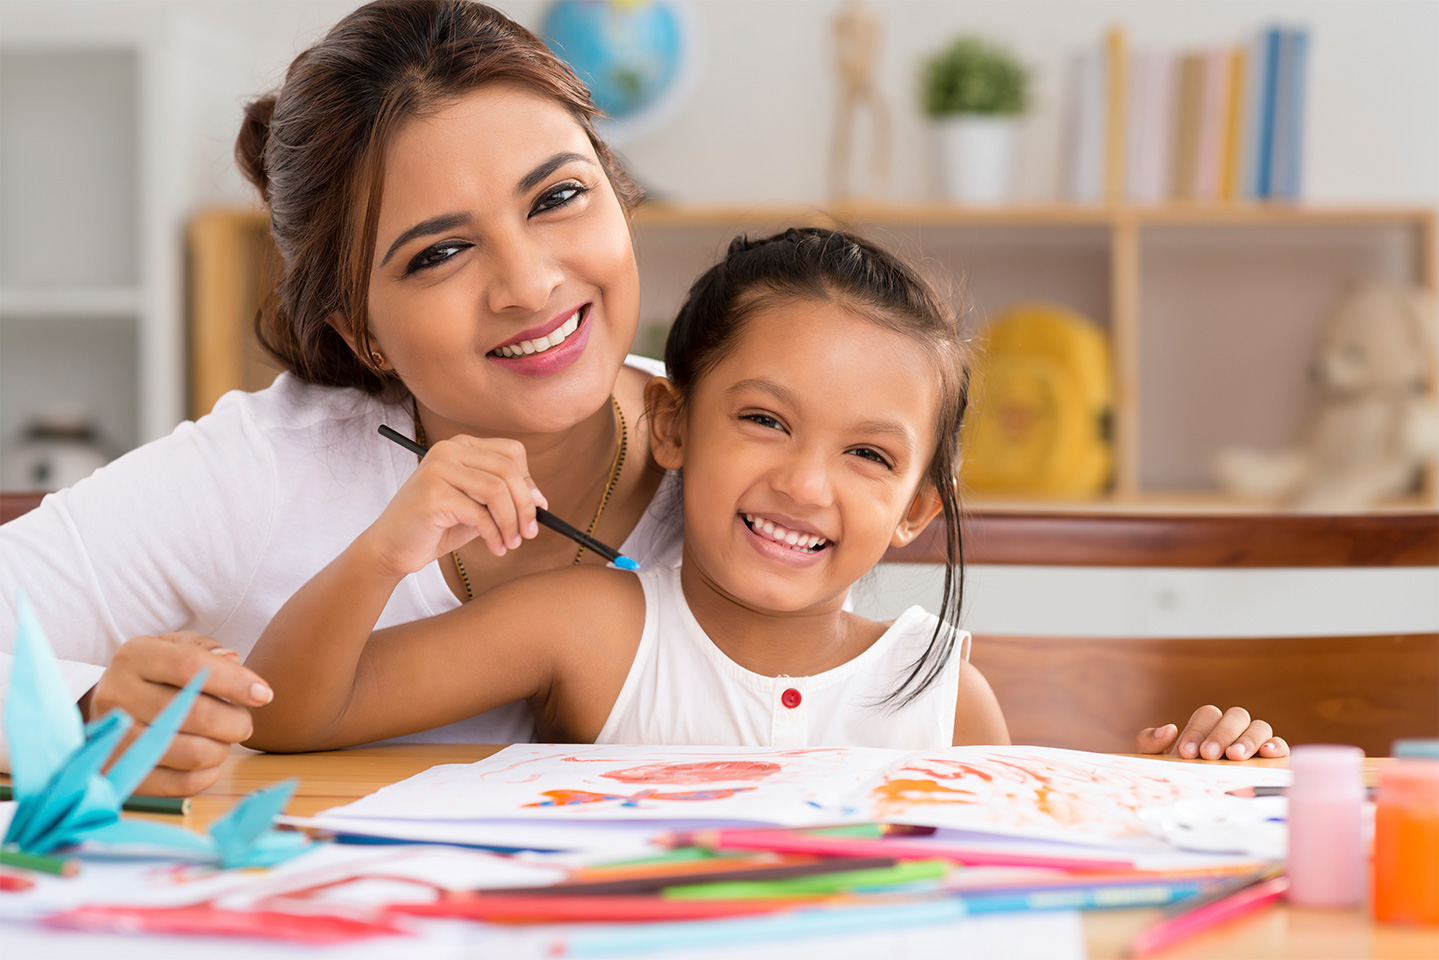 Picture of a Hispanic teacher and kindergarten-aged girl smiling; the girl is holding a paintbrush and is painting